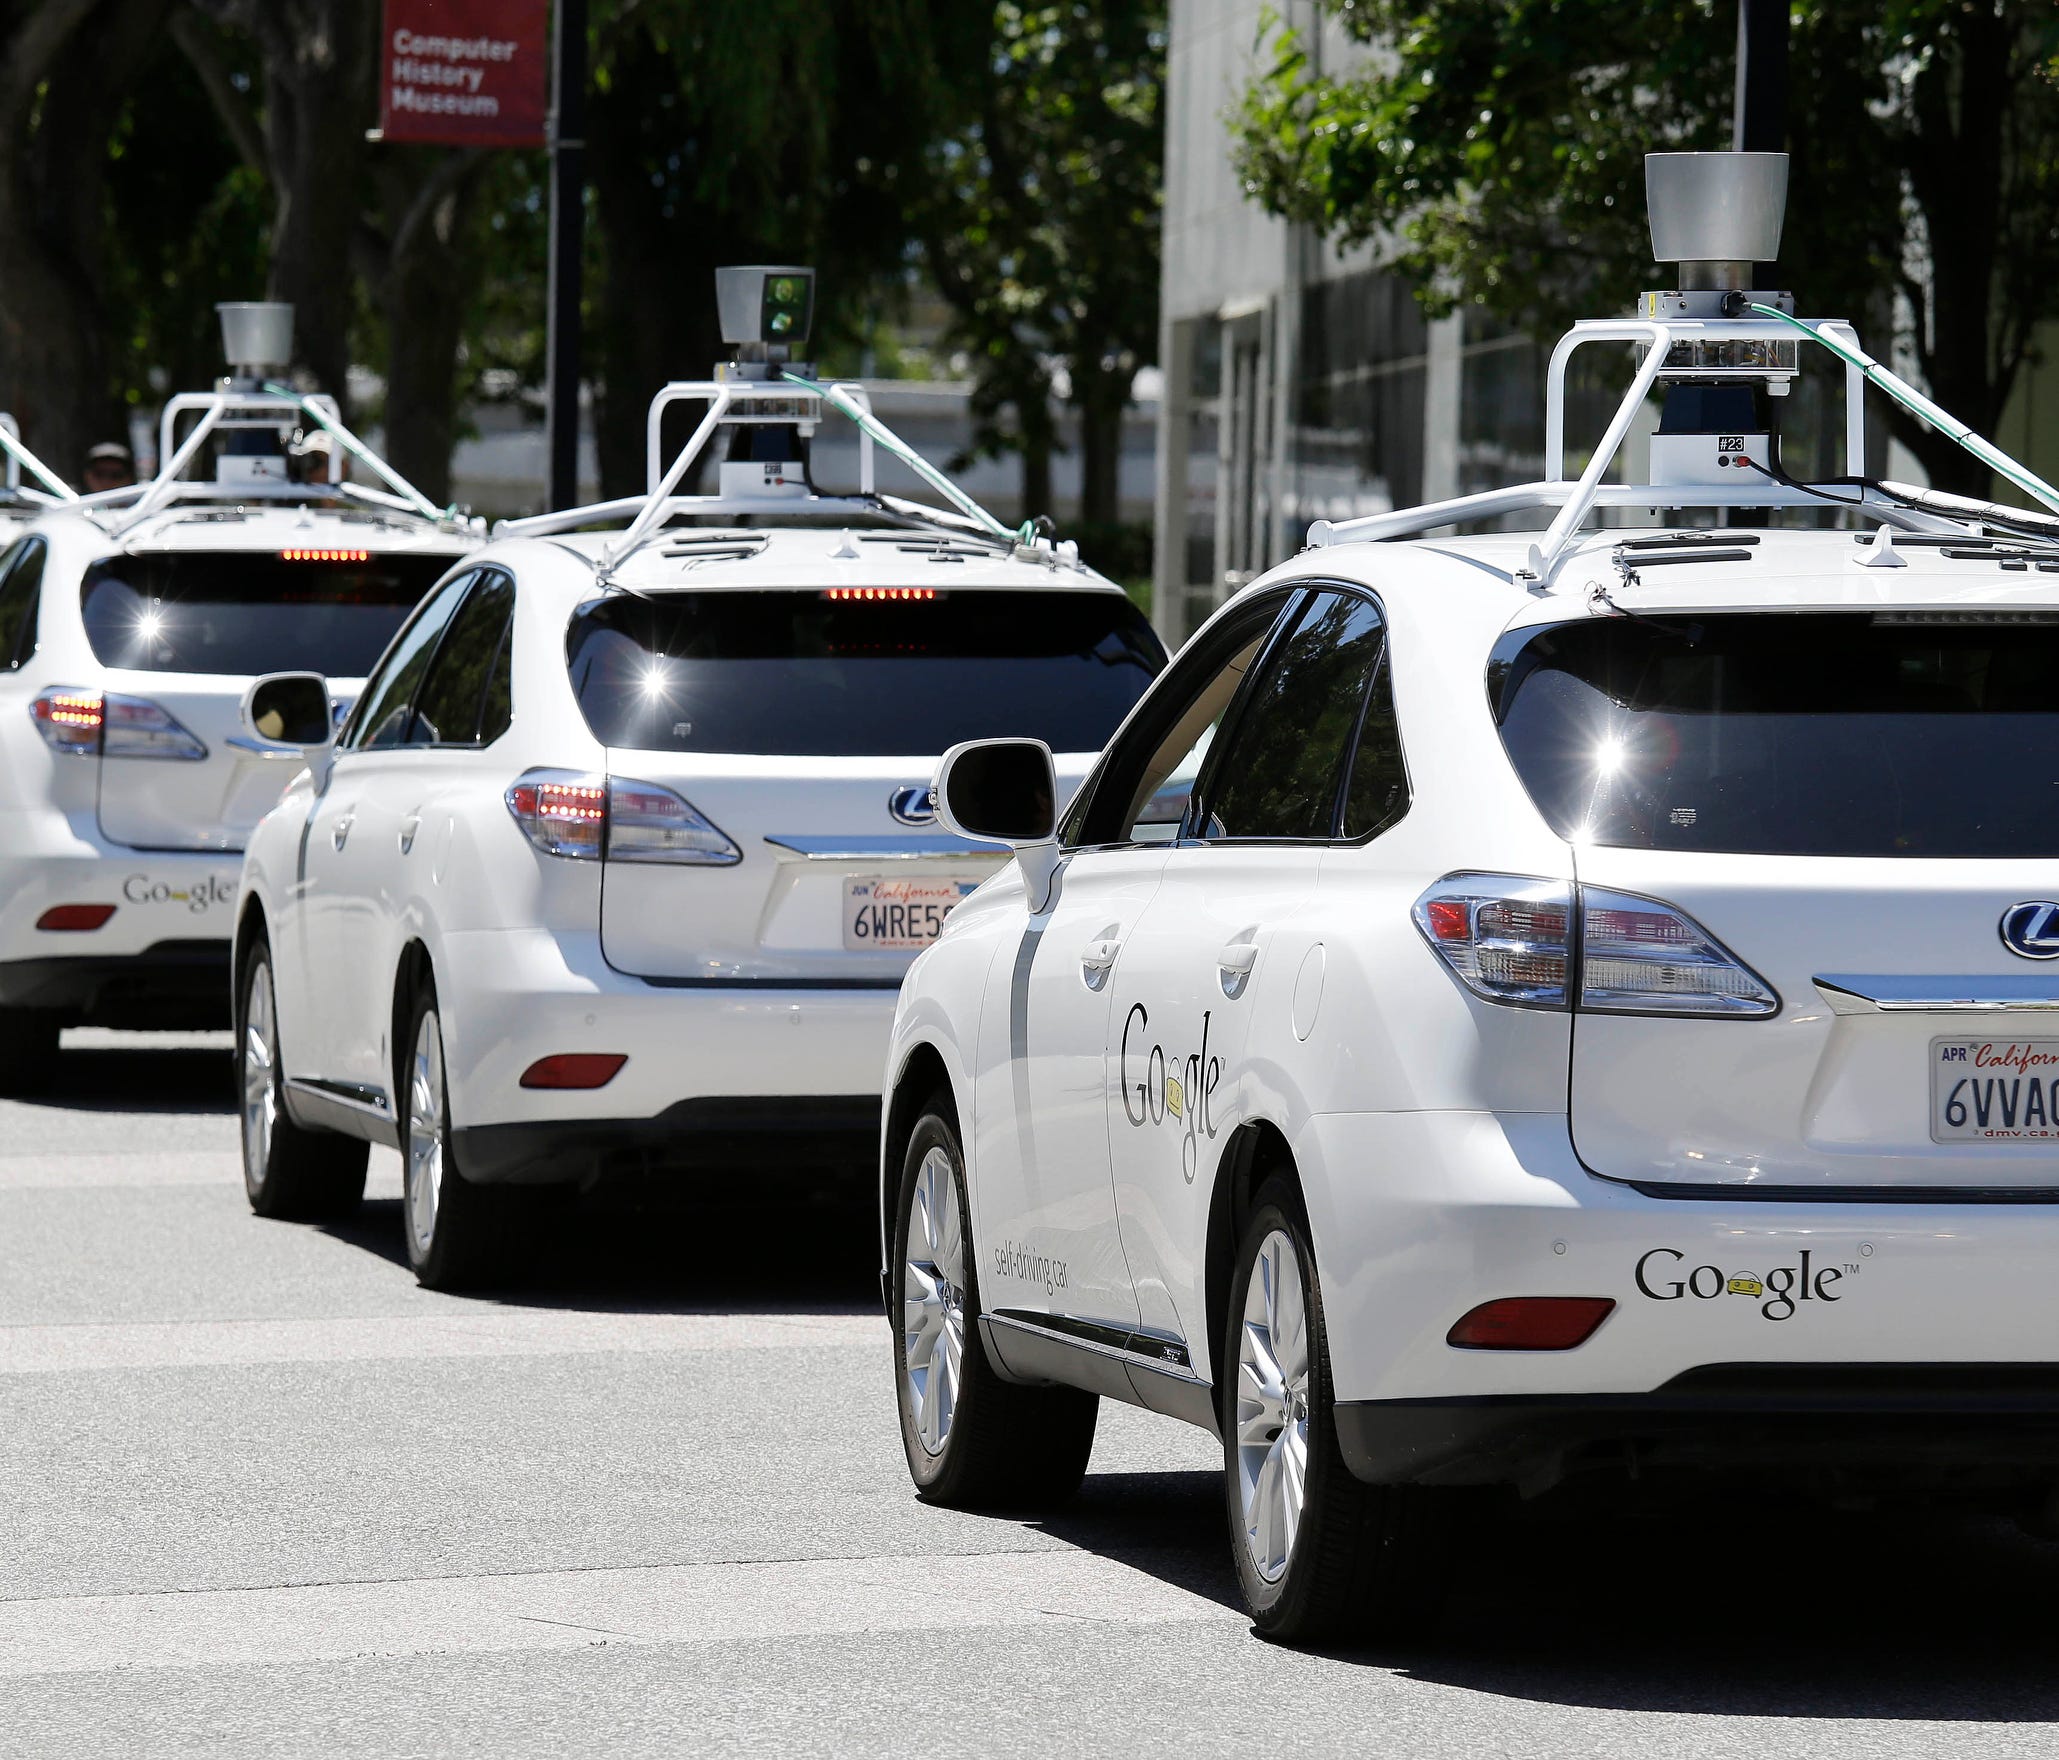 A row of Google self-driving cars outside the Computer History Museum in Mountain View, Calif. in this 2014 photo